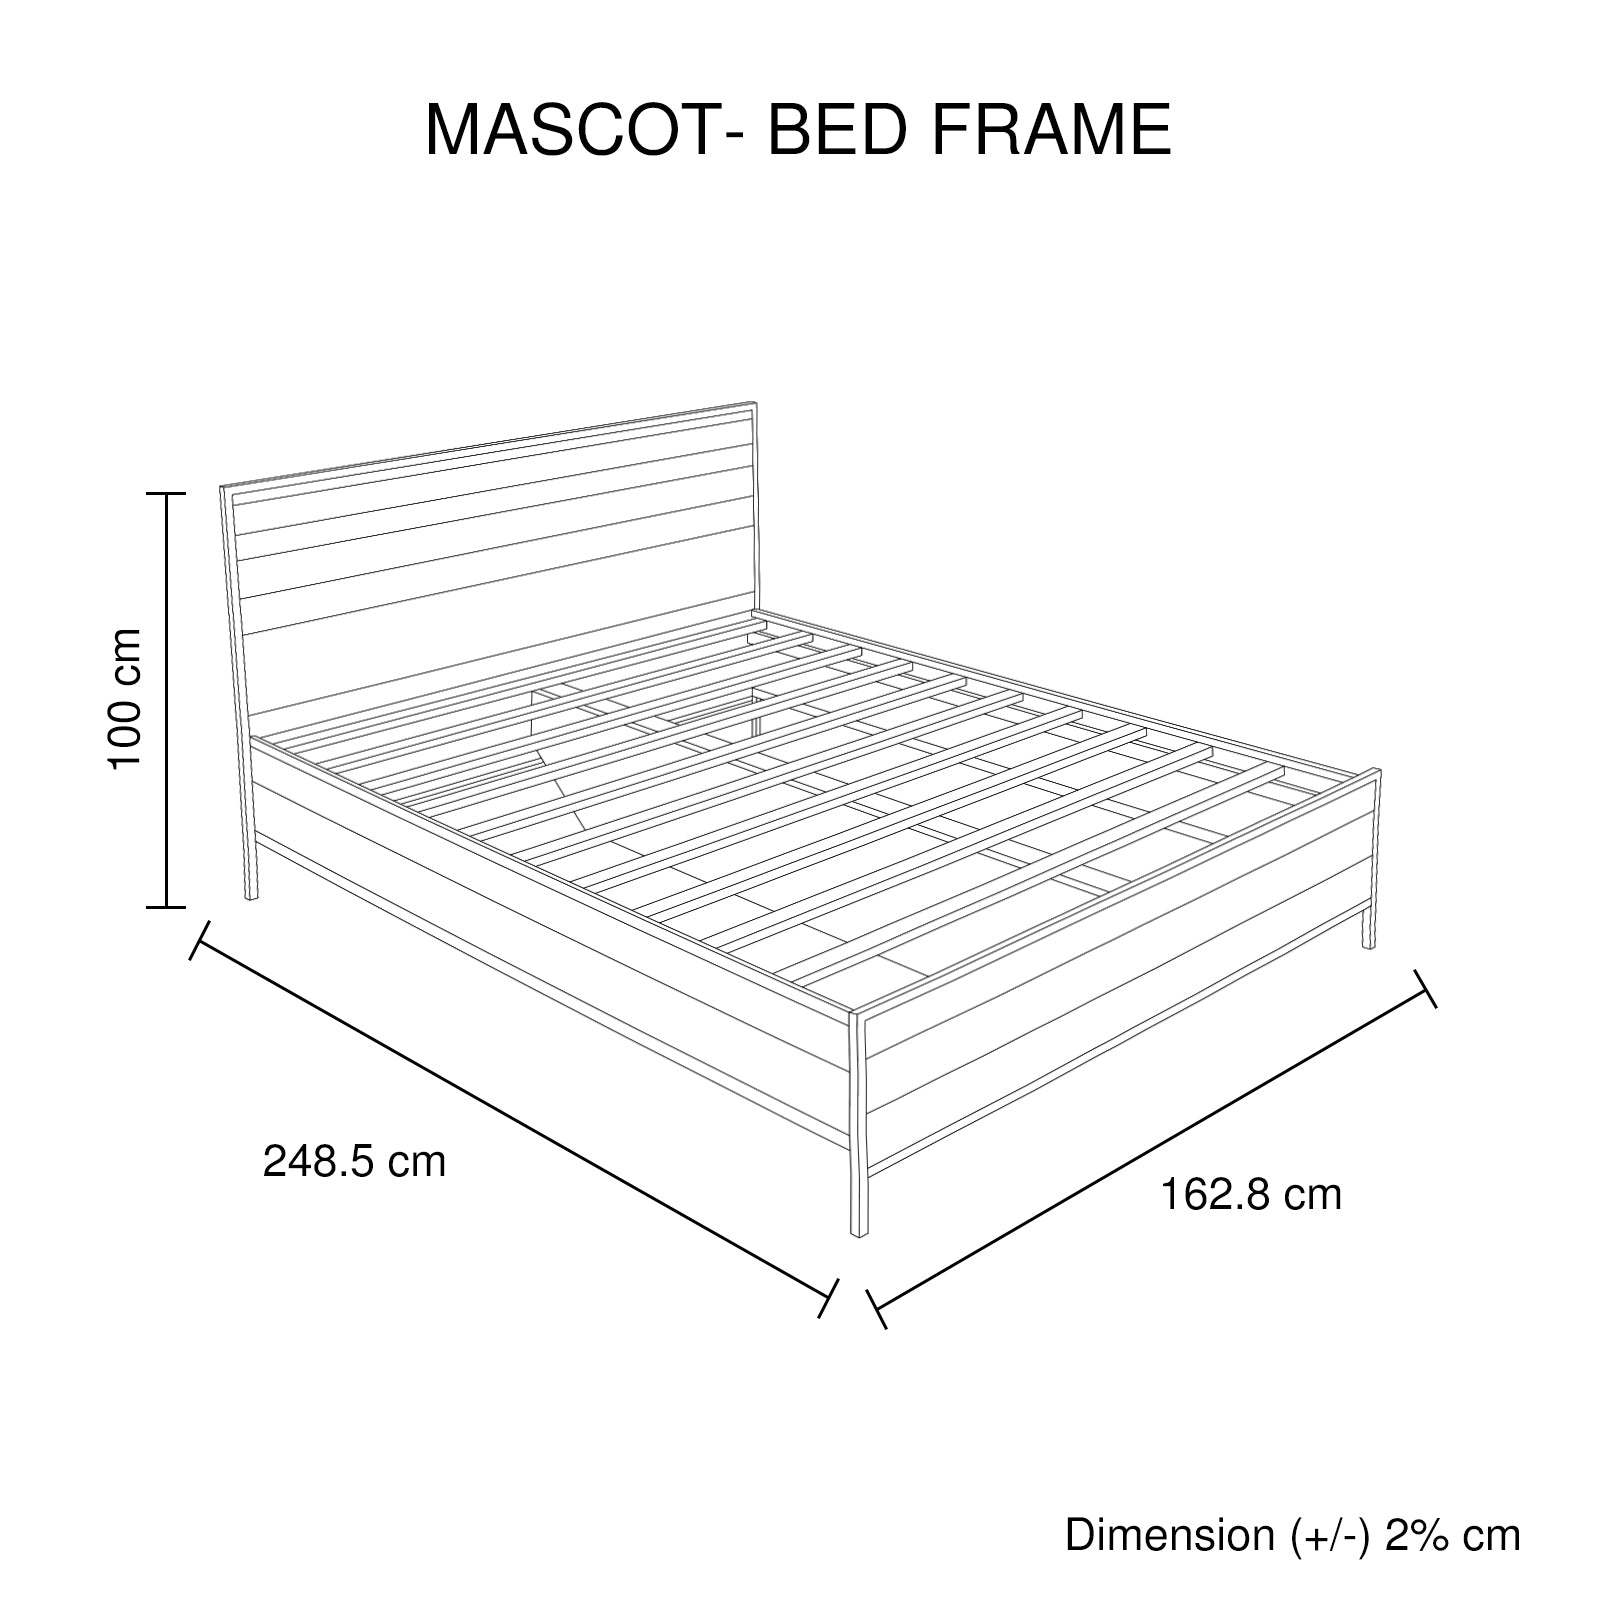 4 Pieces Bedroom Suite with Particle Board Contraction and Metal Legs Queen Size Oak Colour Bed, Bedside Table & Tallboy